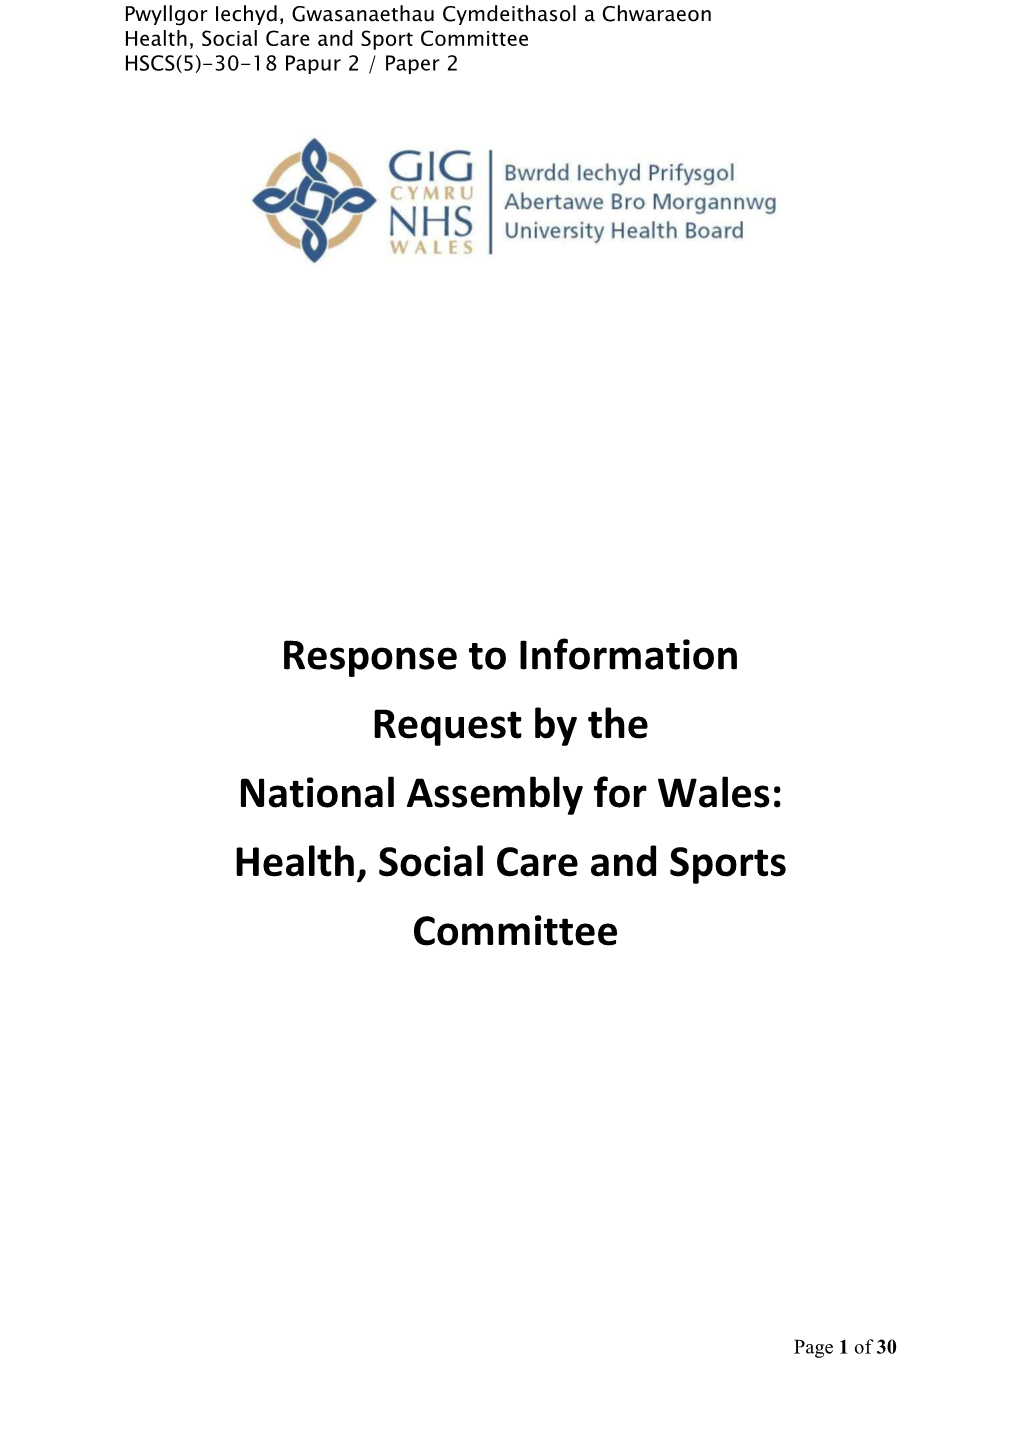 Response to Information Request by the National Assembly for Wales: Health, Social Care and Sports Committee